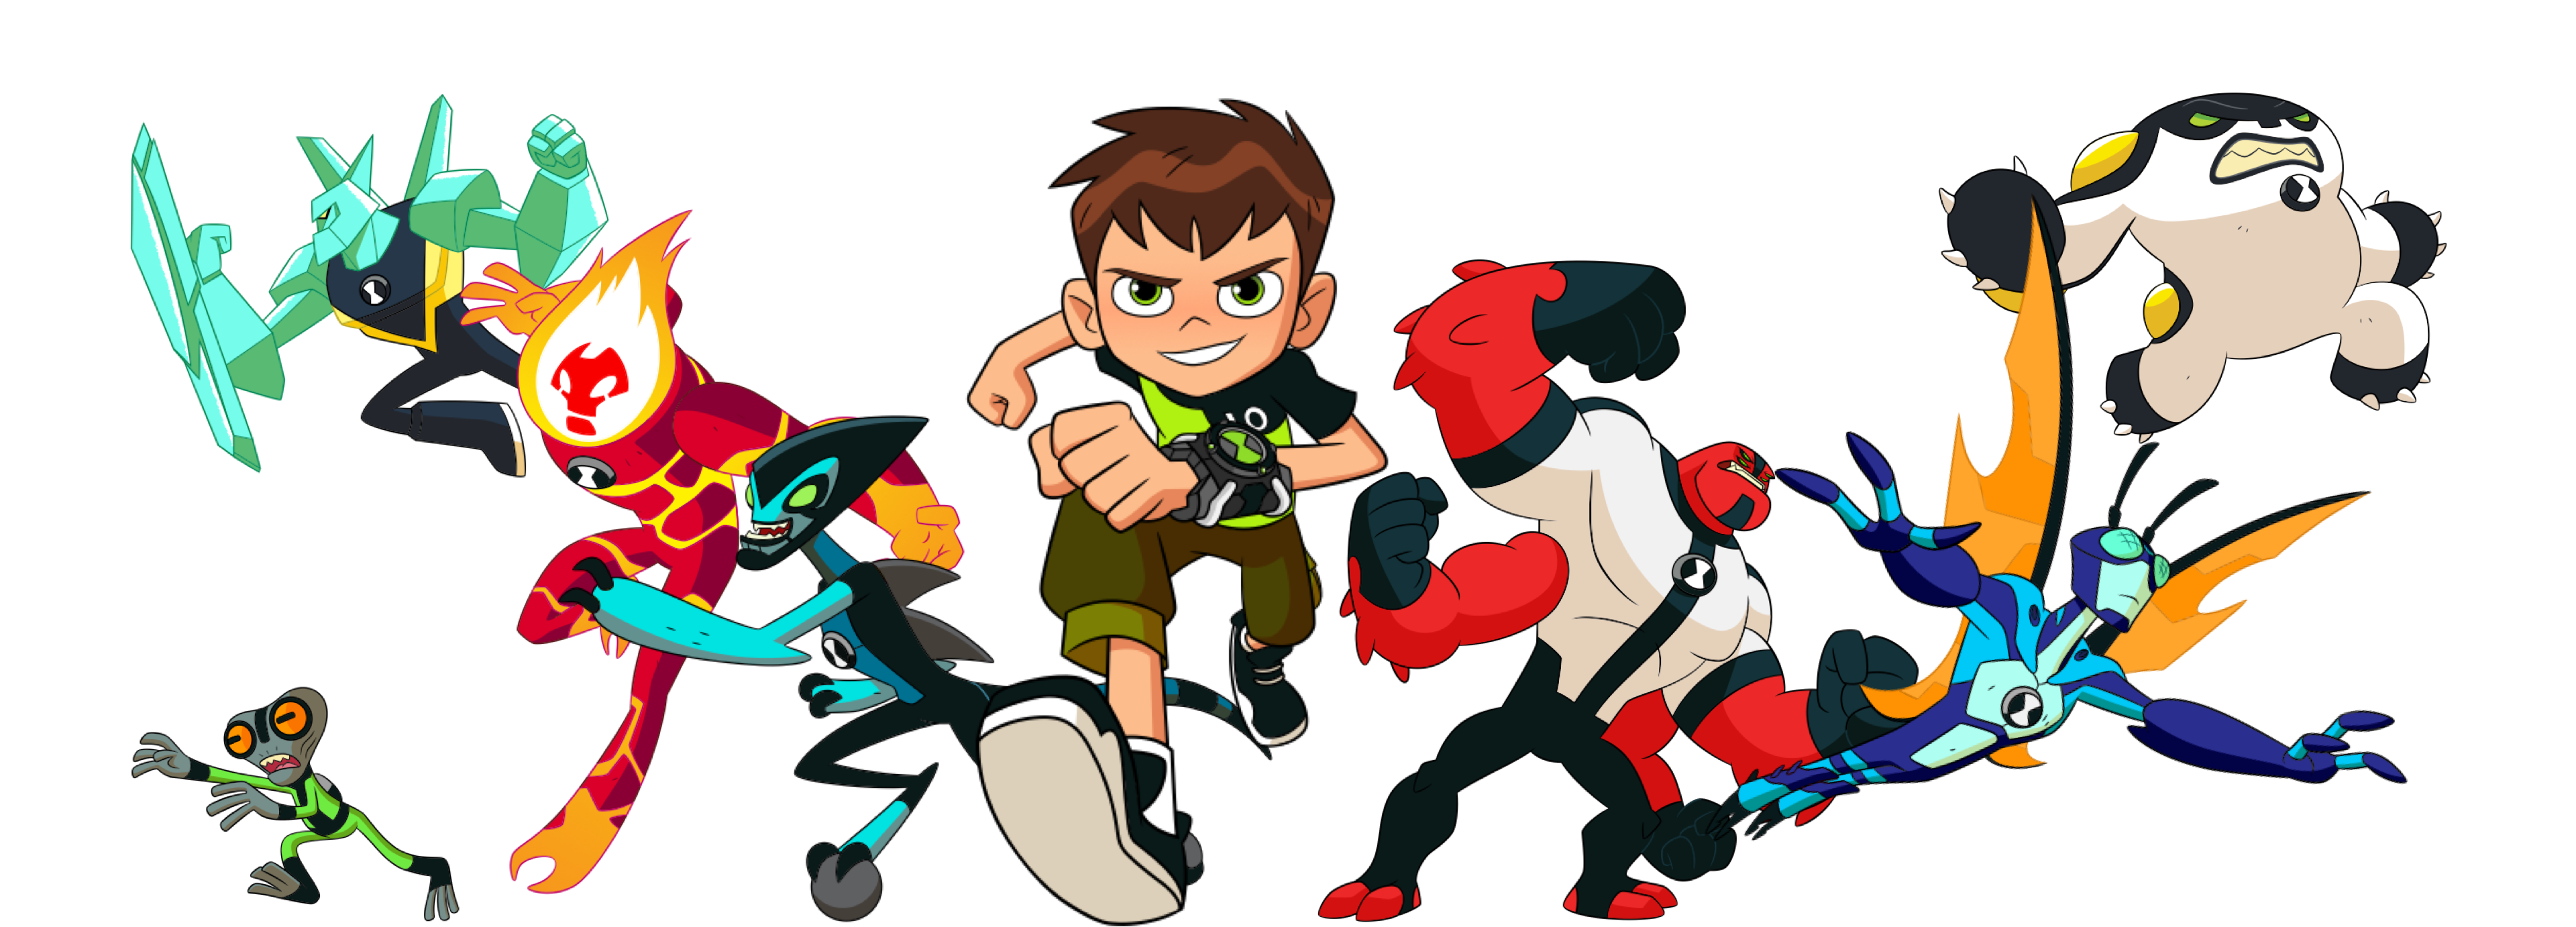 cheri spillers recommends ben 10 pictures pic